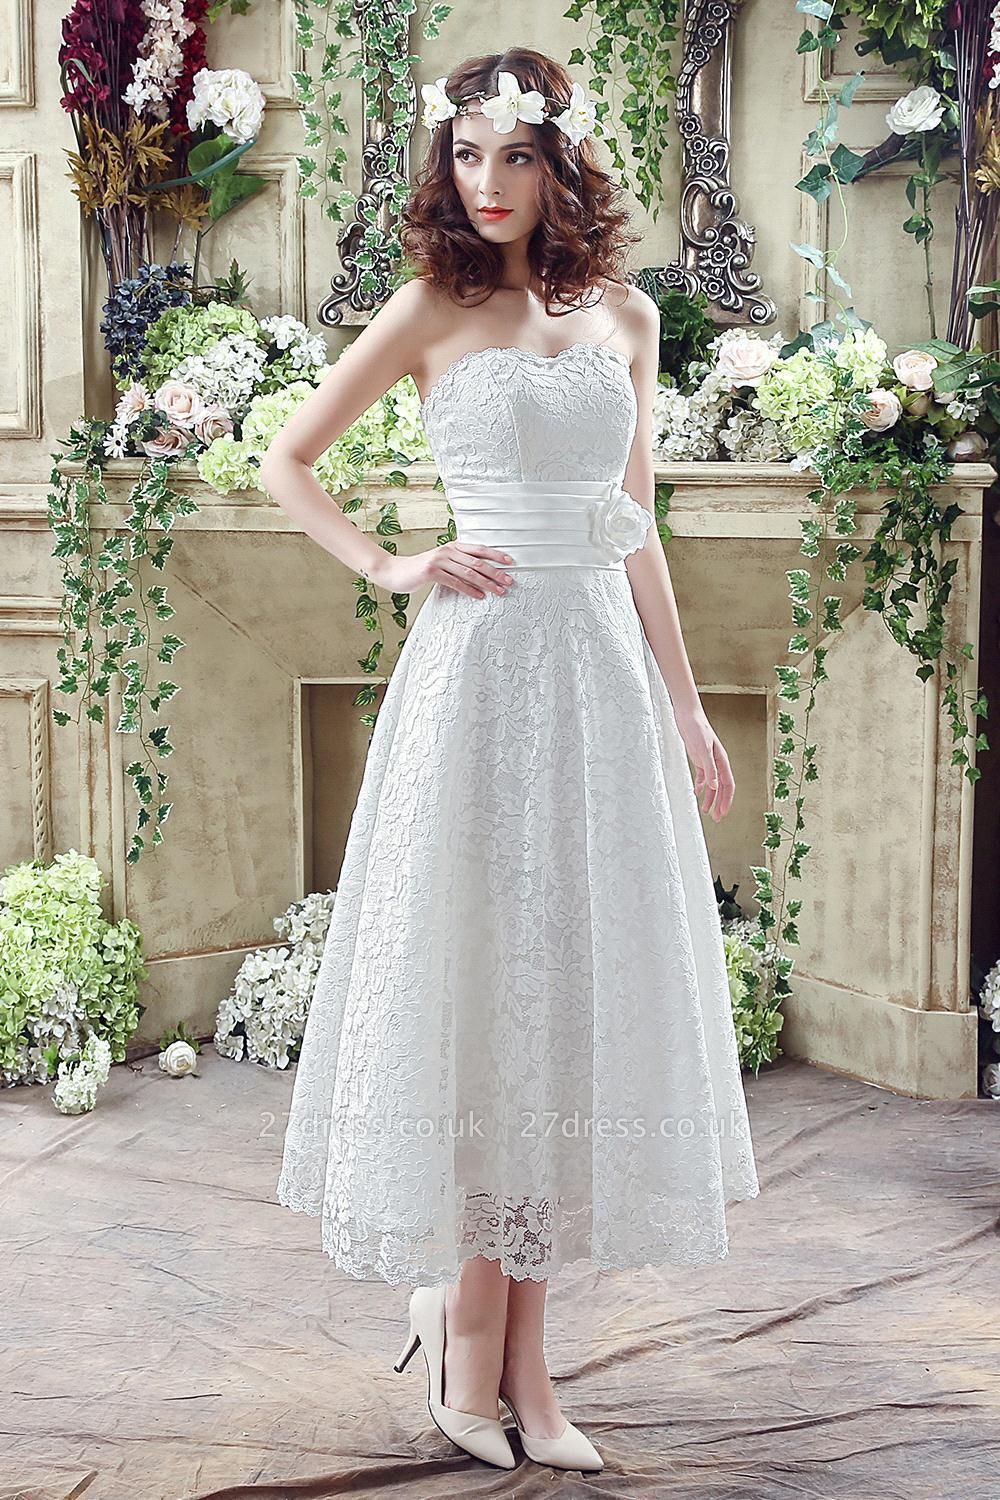 Delicate Lace Flower Strapless Wedding Dress A-line Sleeveless Lace-up